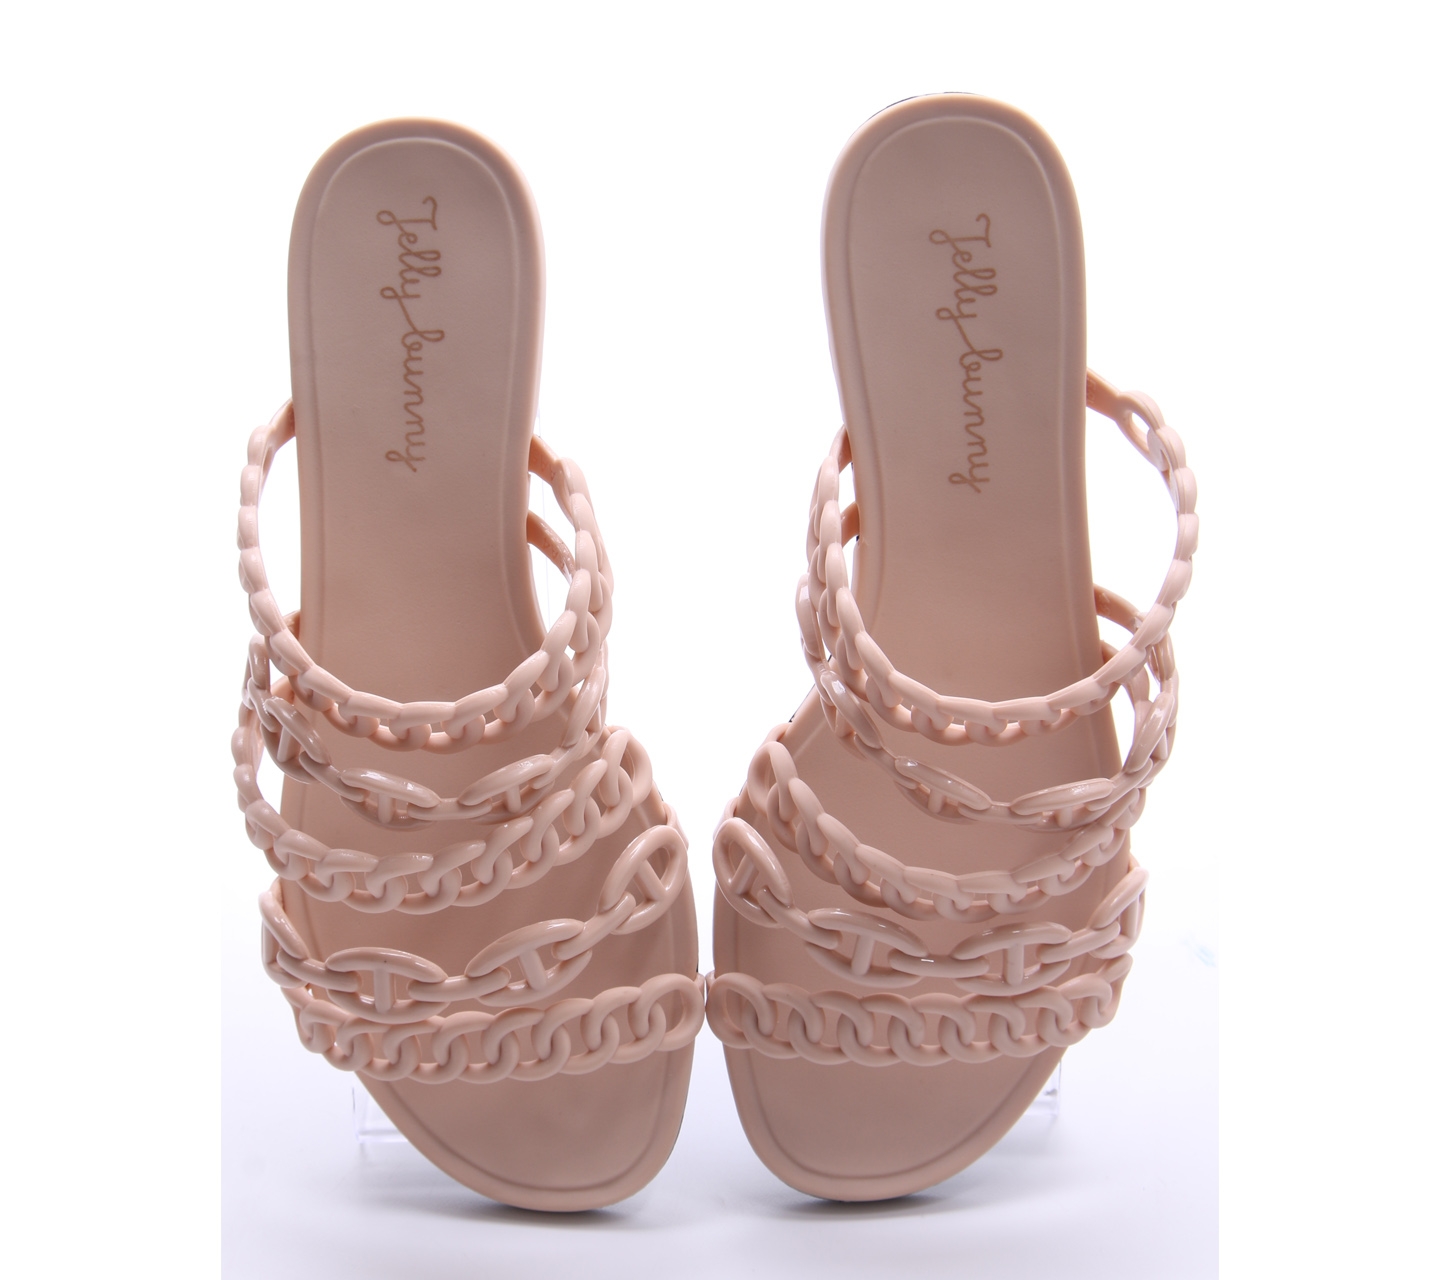 Jelly Bunny Soft Pink Sandals